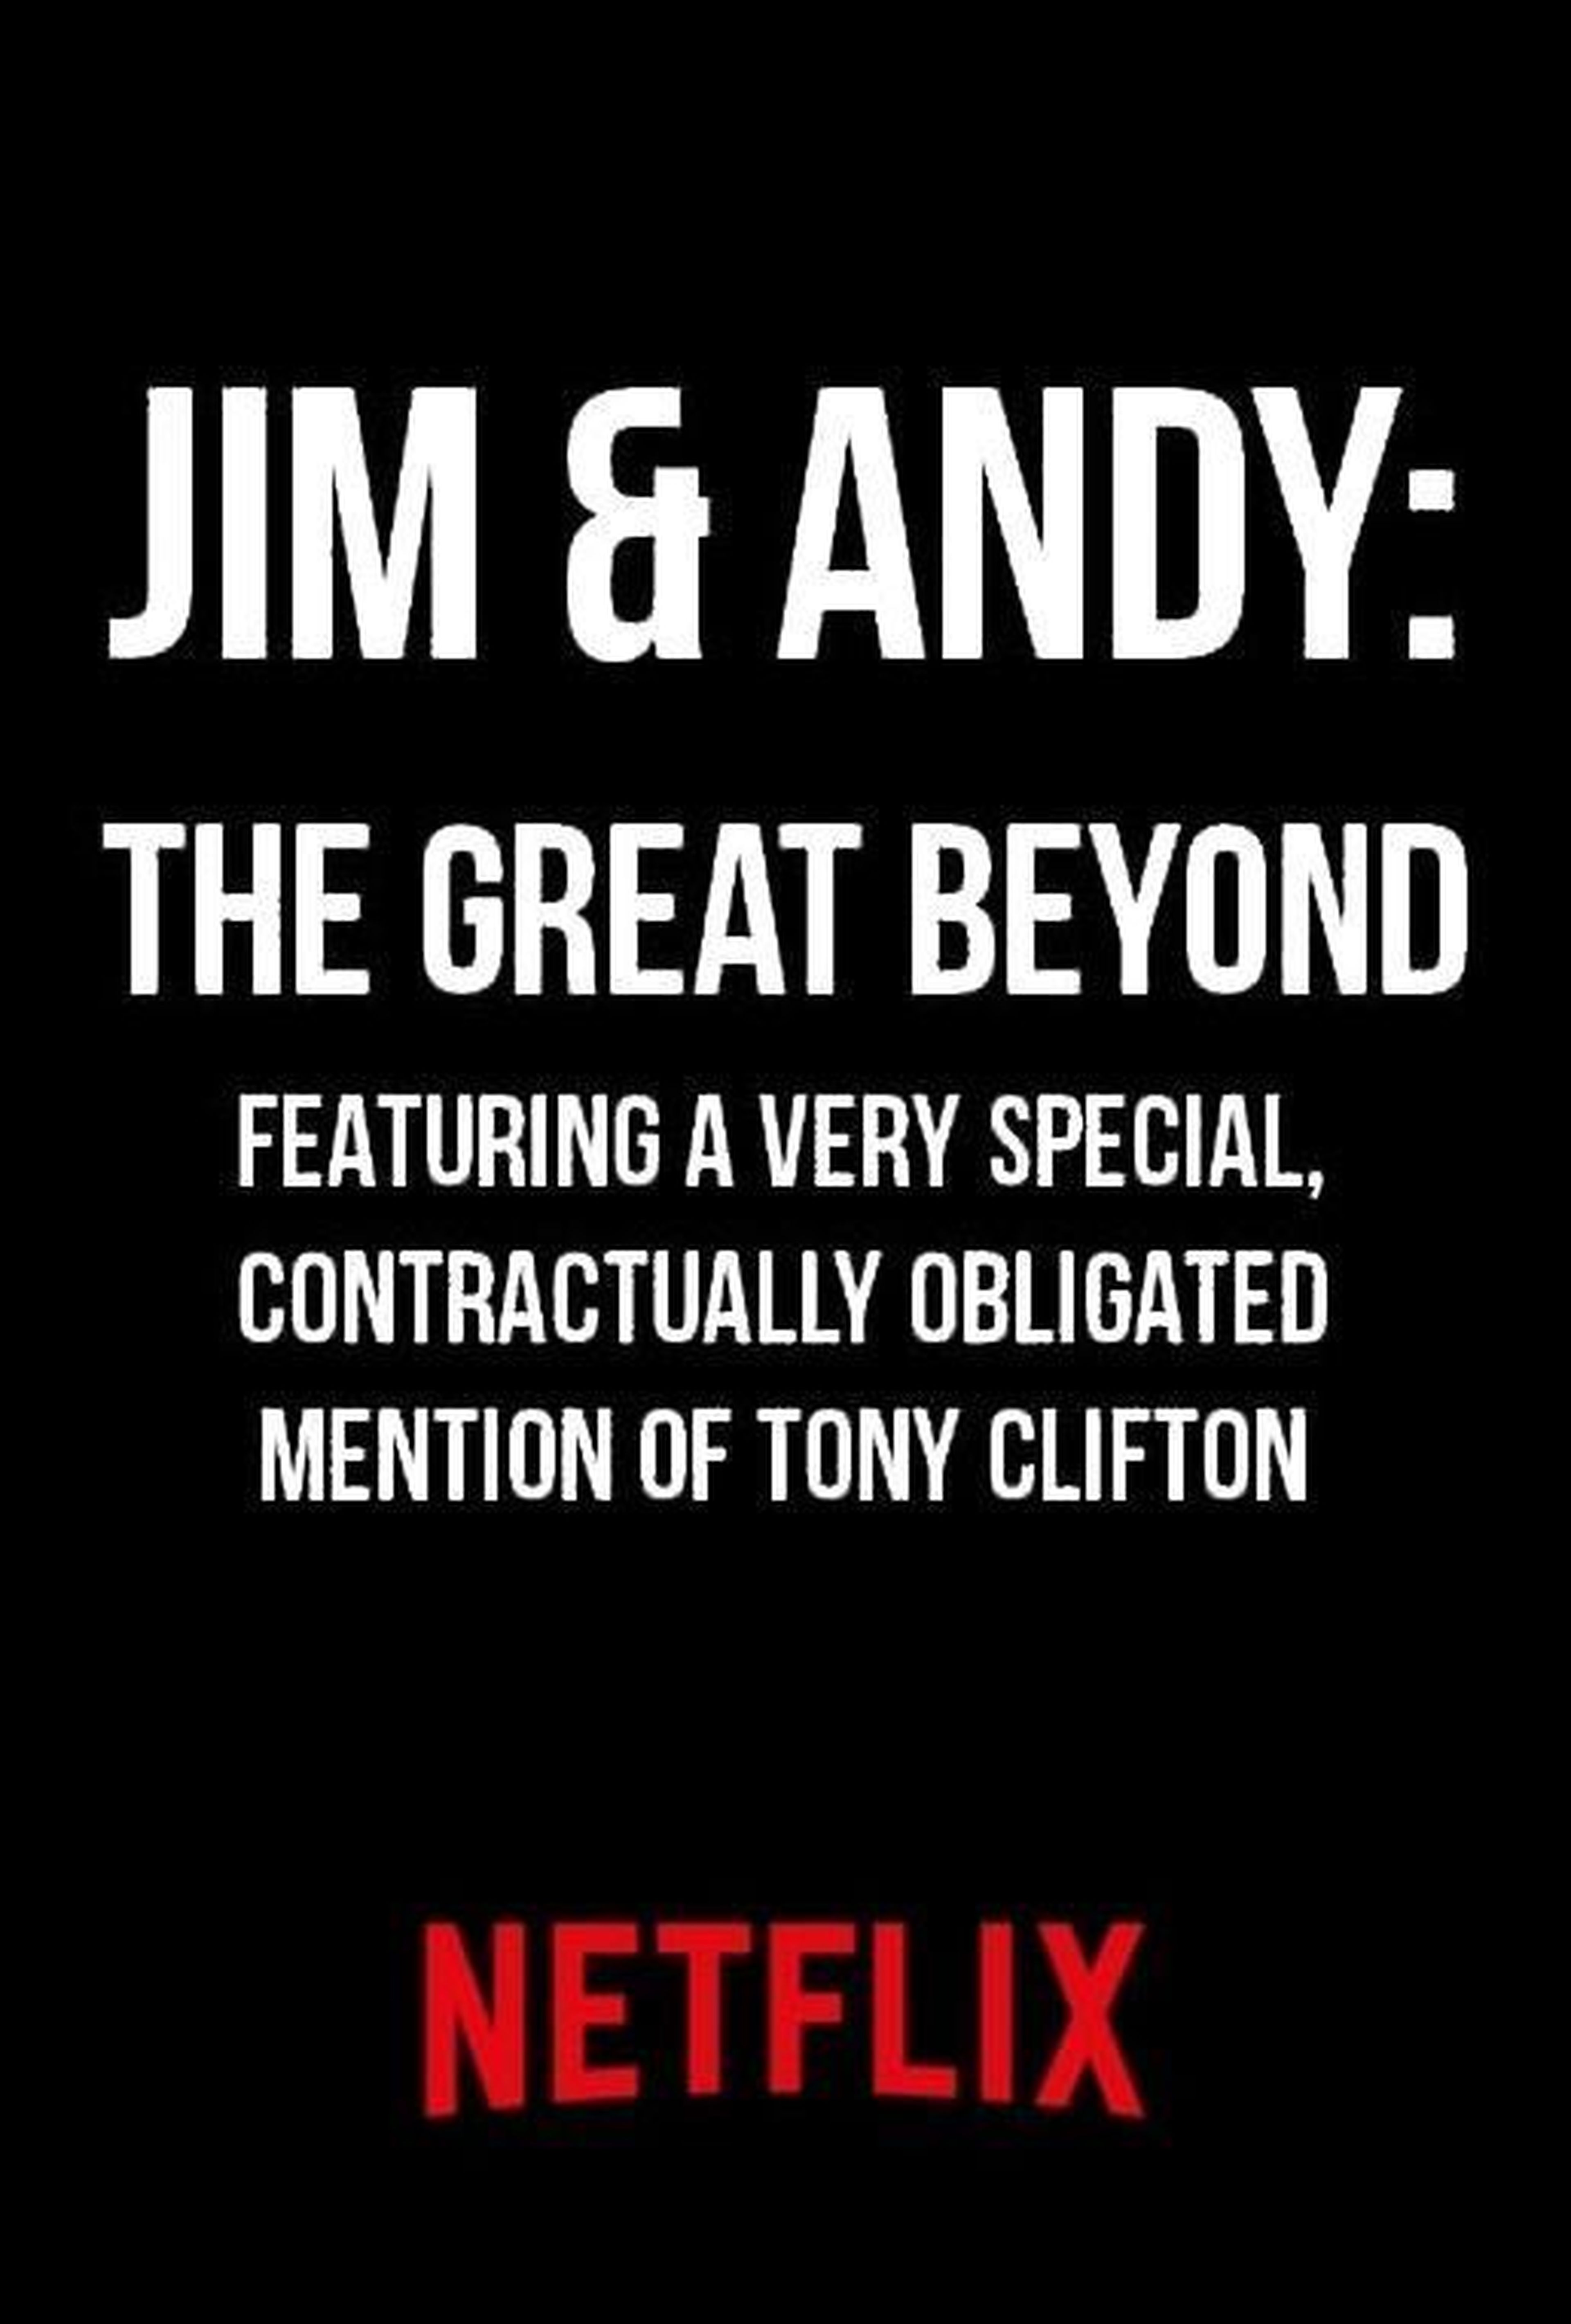 Jim & Andy: The Great Beyond - The Story of Jim Carrey & Andy Kaufman Featuring a Very Special, Contractually Obligated Mention of Tony Clifton